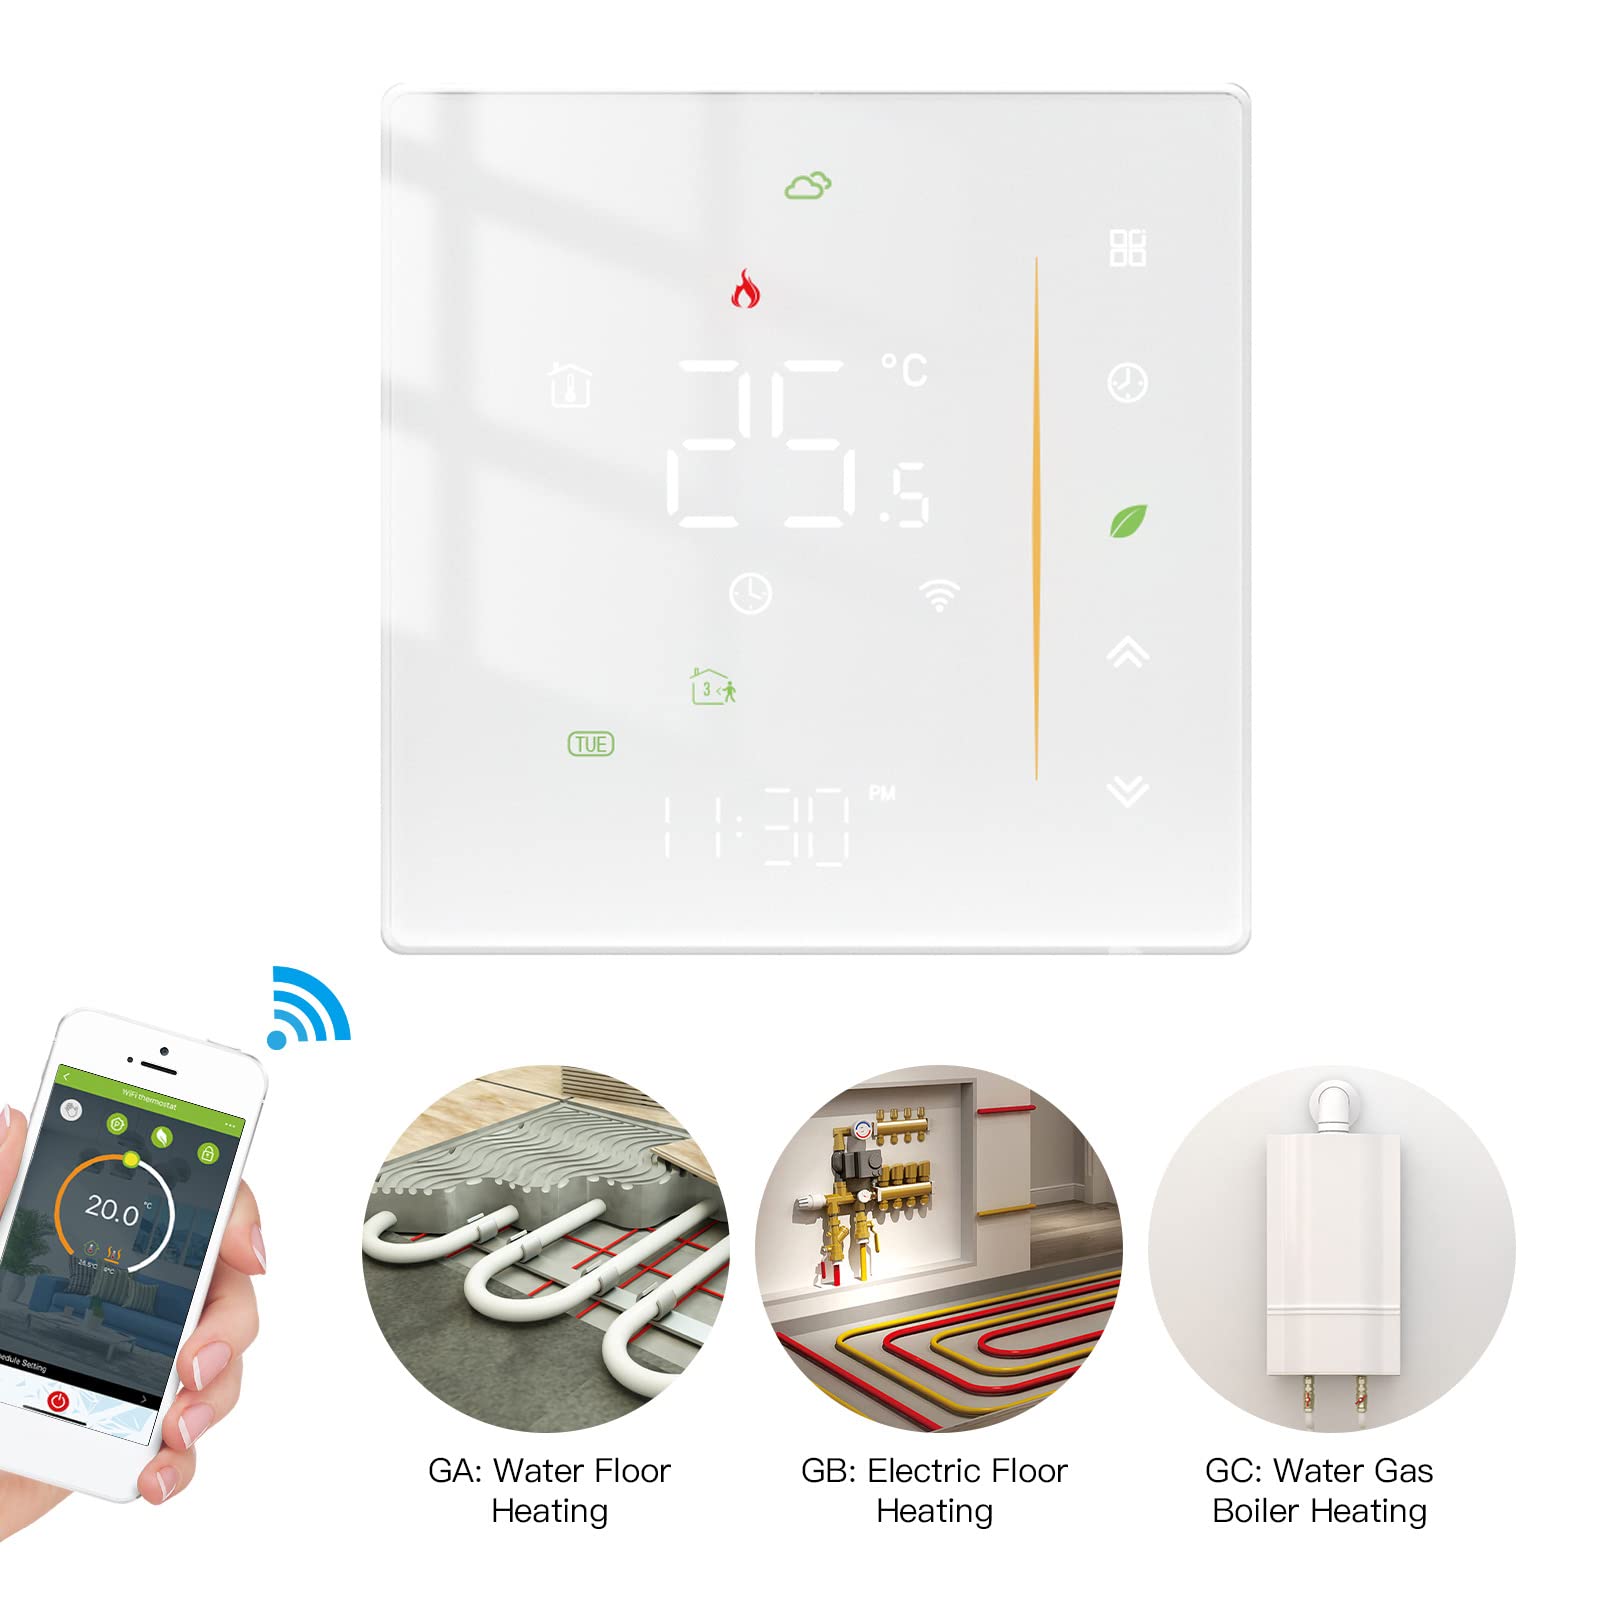 Intelligent Temperature Control,Smart Thermostat for Electric Floor Heating,Programmable, WIFI, APP Control,Energy Saving, Remote Access,95 240V, White